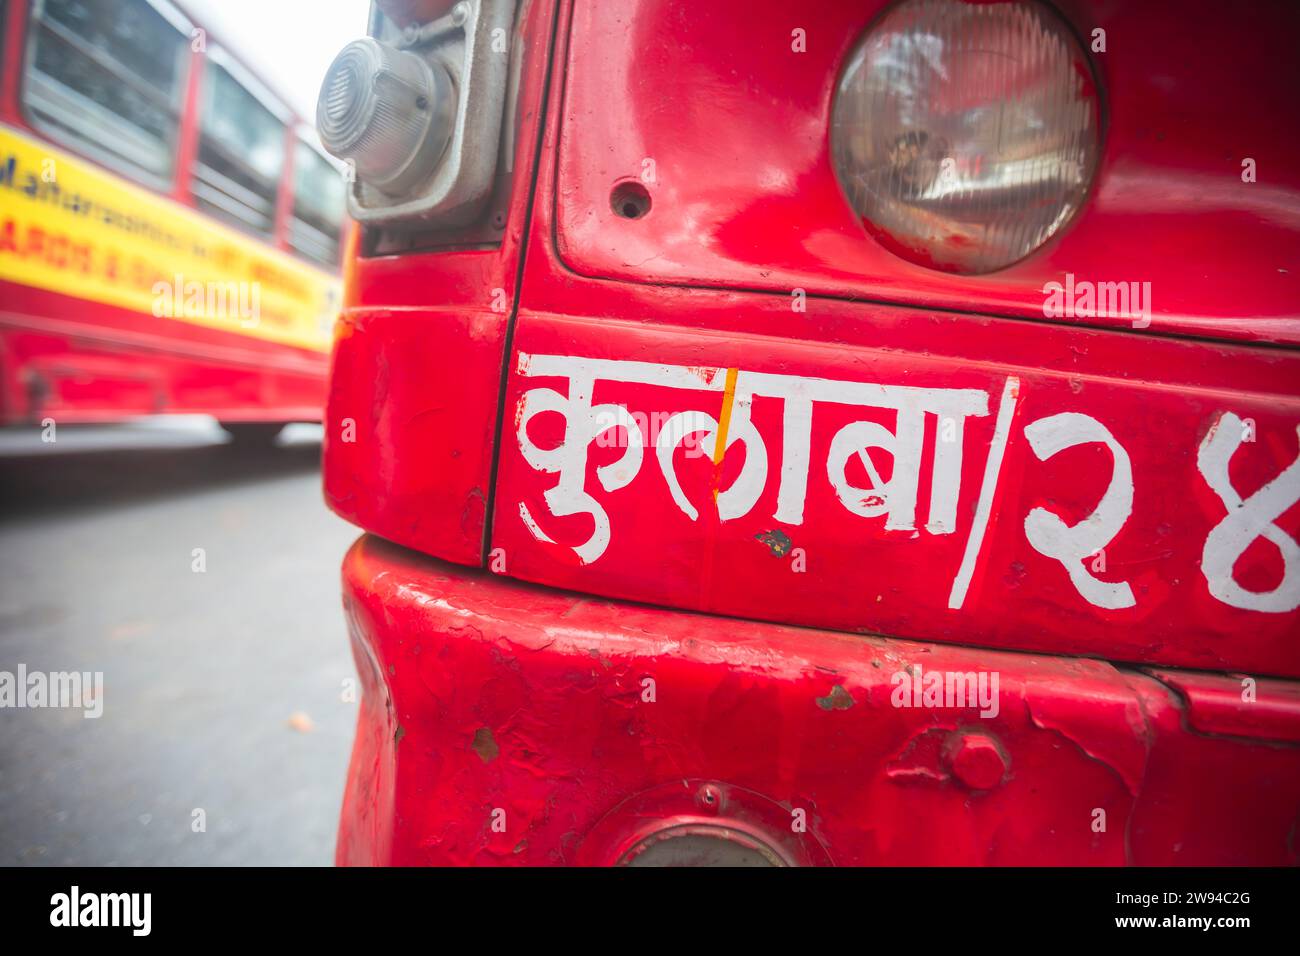 Closeup of a Best Bus at Colaba Mumbai. Colaba is written in Marathi on the bus. Stock Photo